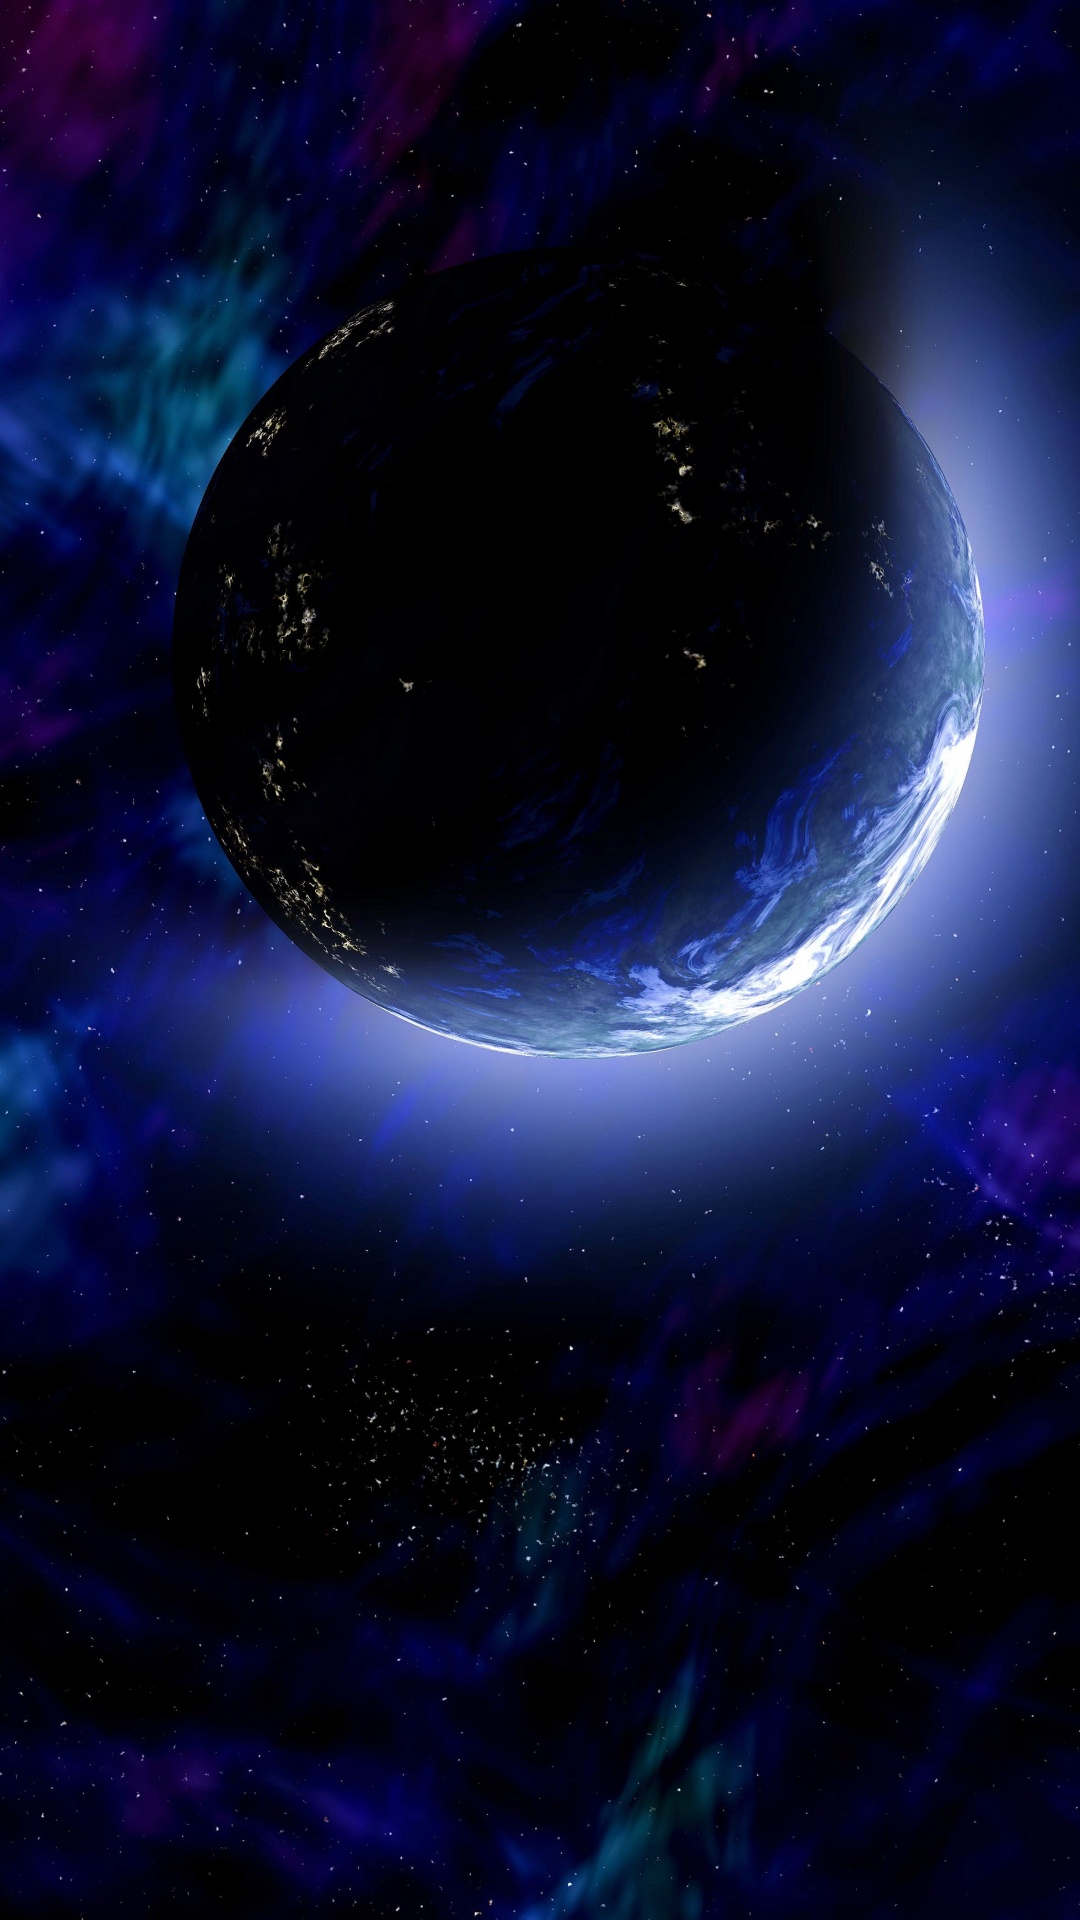 Blue and White Planet Painting. Wallpaper in 1080x1920 Resolution